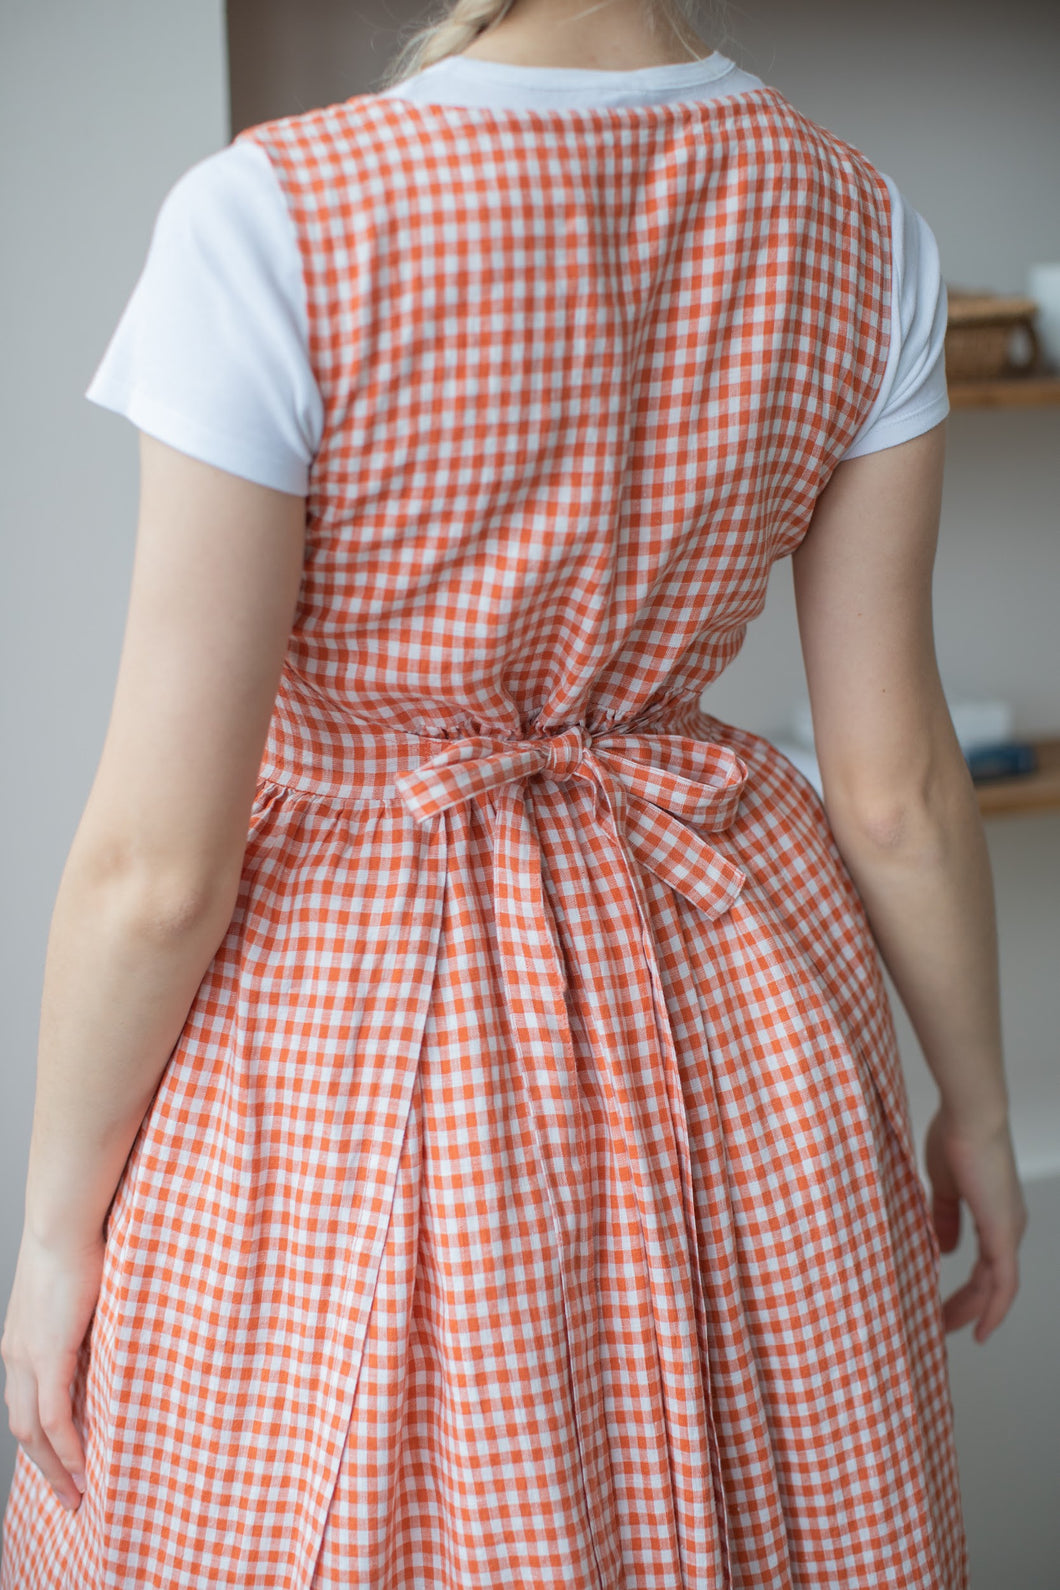 100% Linen Cottage Dress Apron in Checkered Terracotta